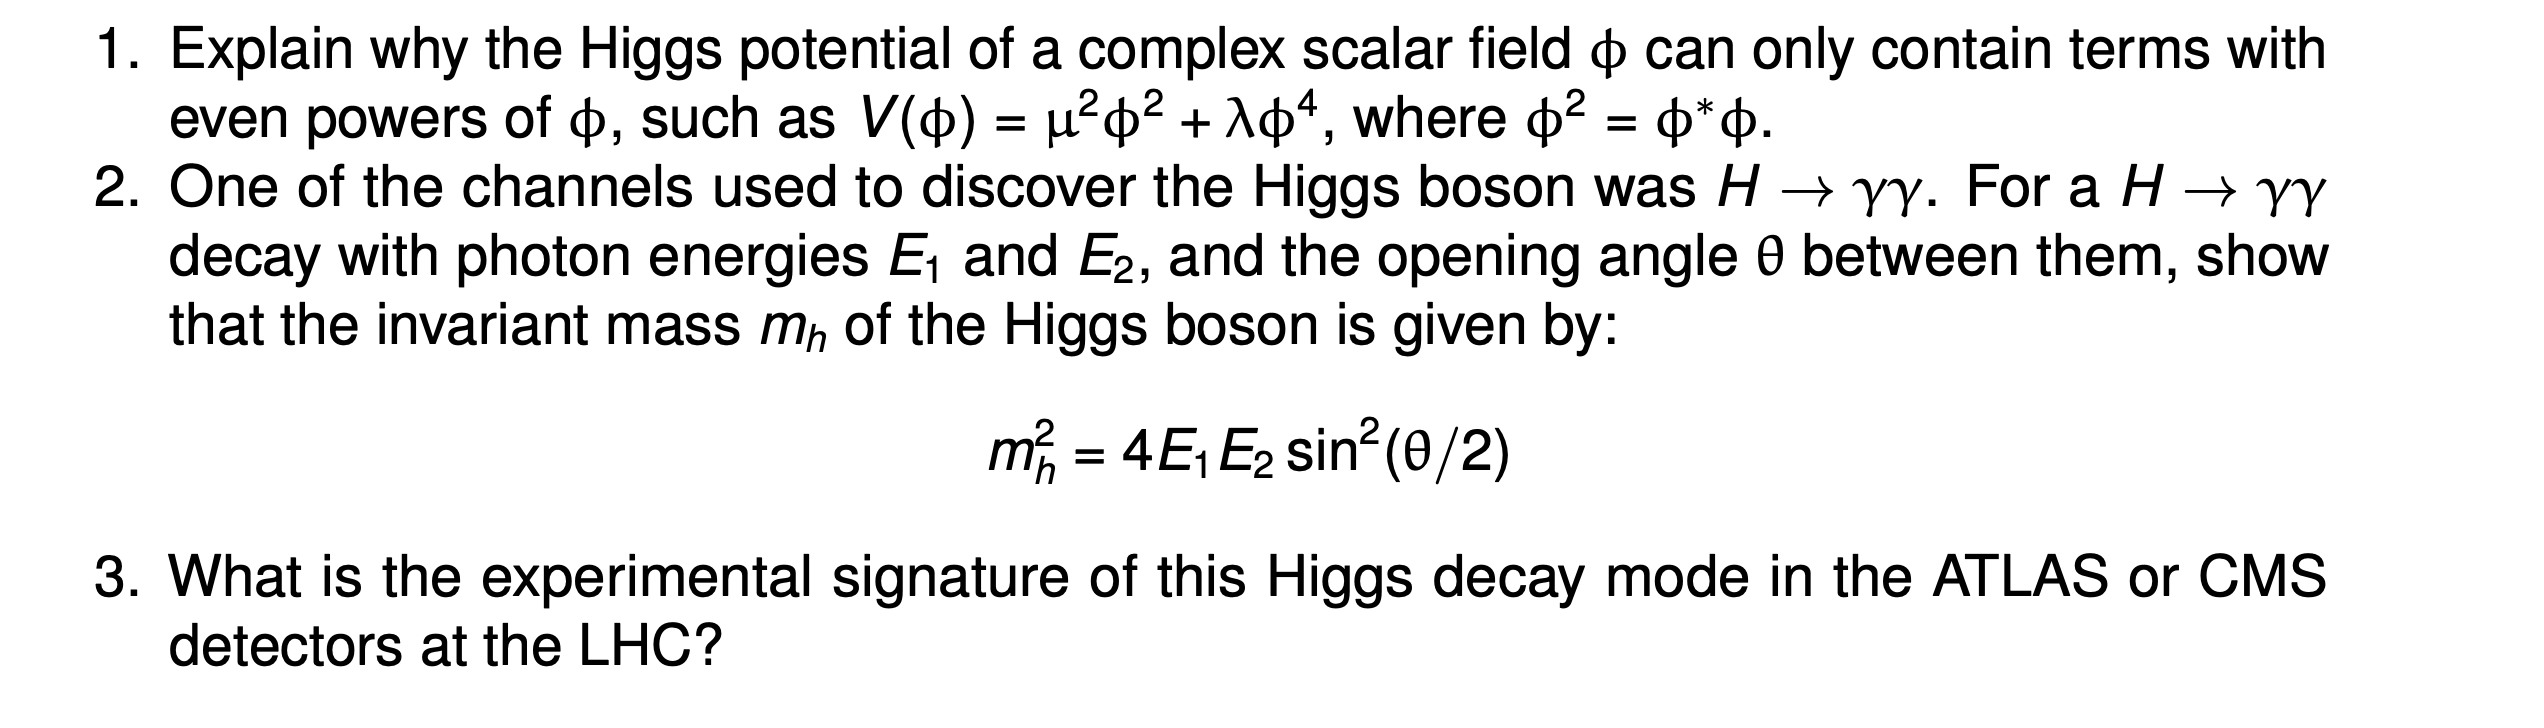 1. Explain why the Higgs potential of a complex scalar field can only contain terms with even powers of $,